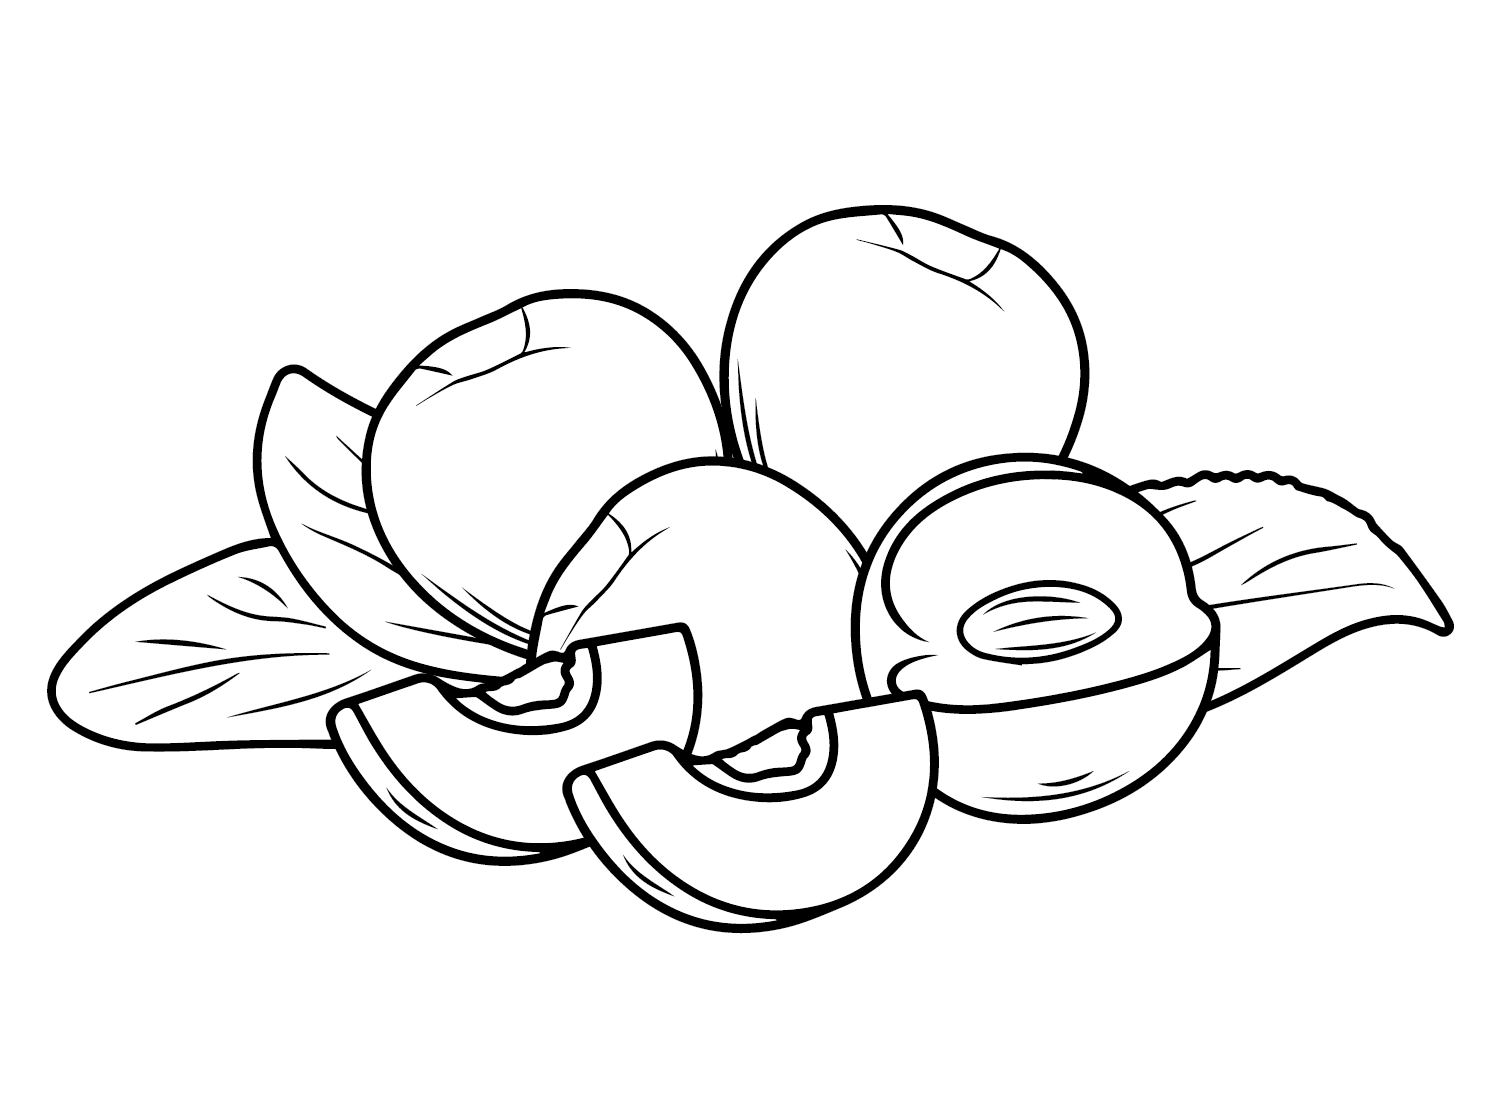 Ripen Nectarines Coloring Page